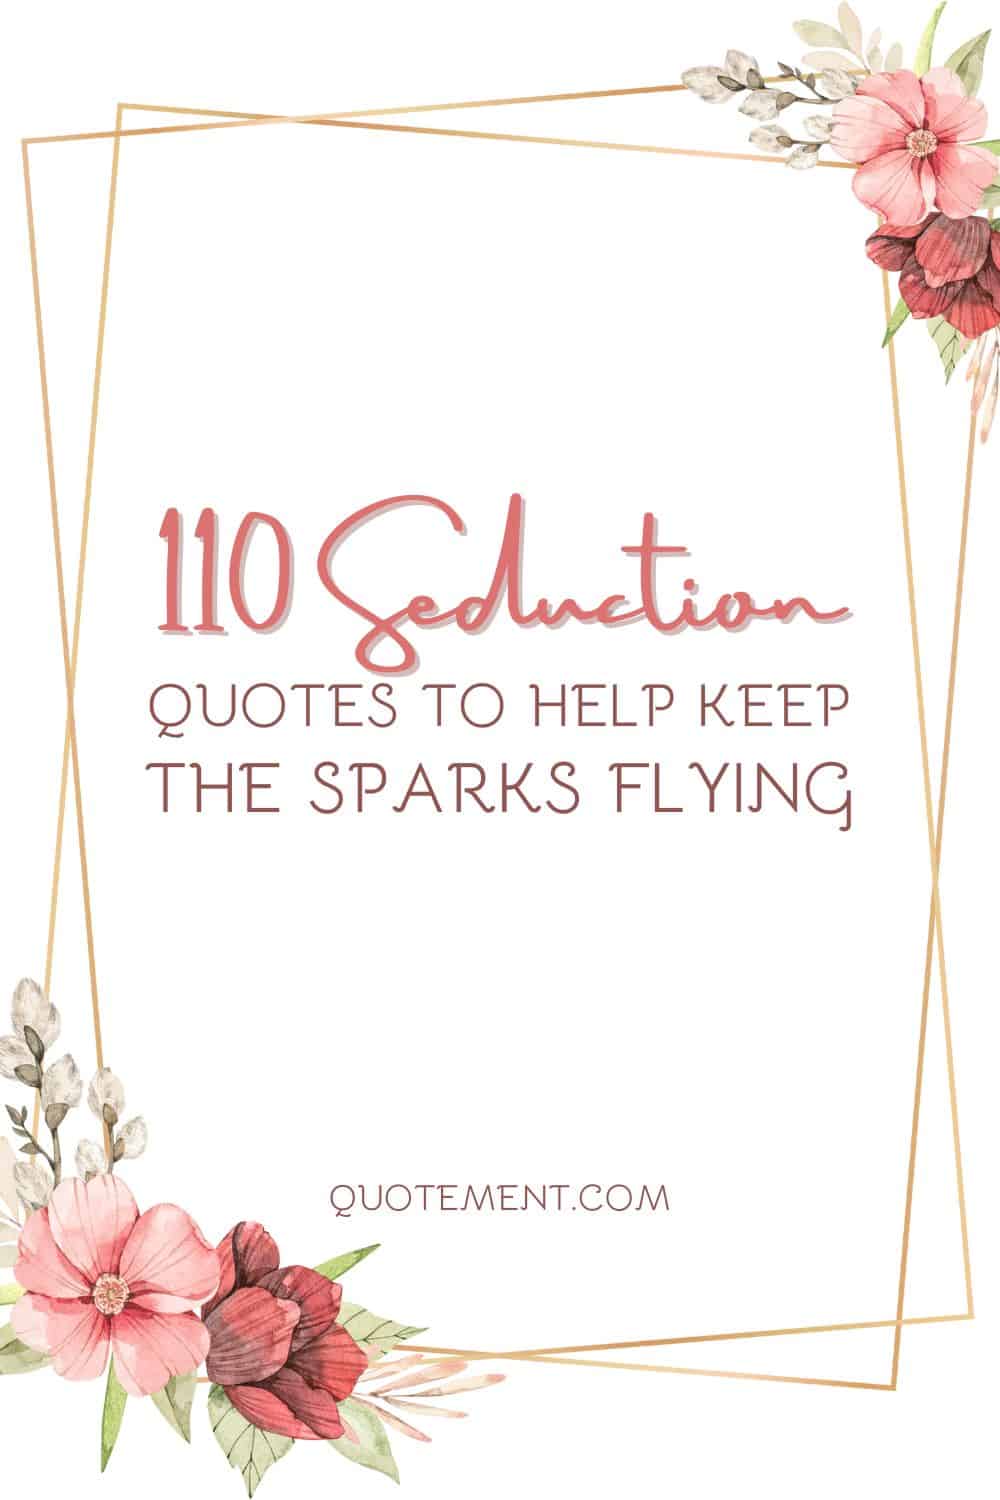 110 Seduction Quotes To Help Keep The Sparks Flying
